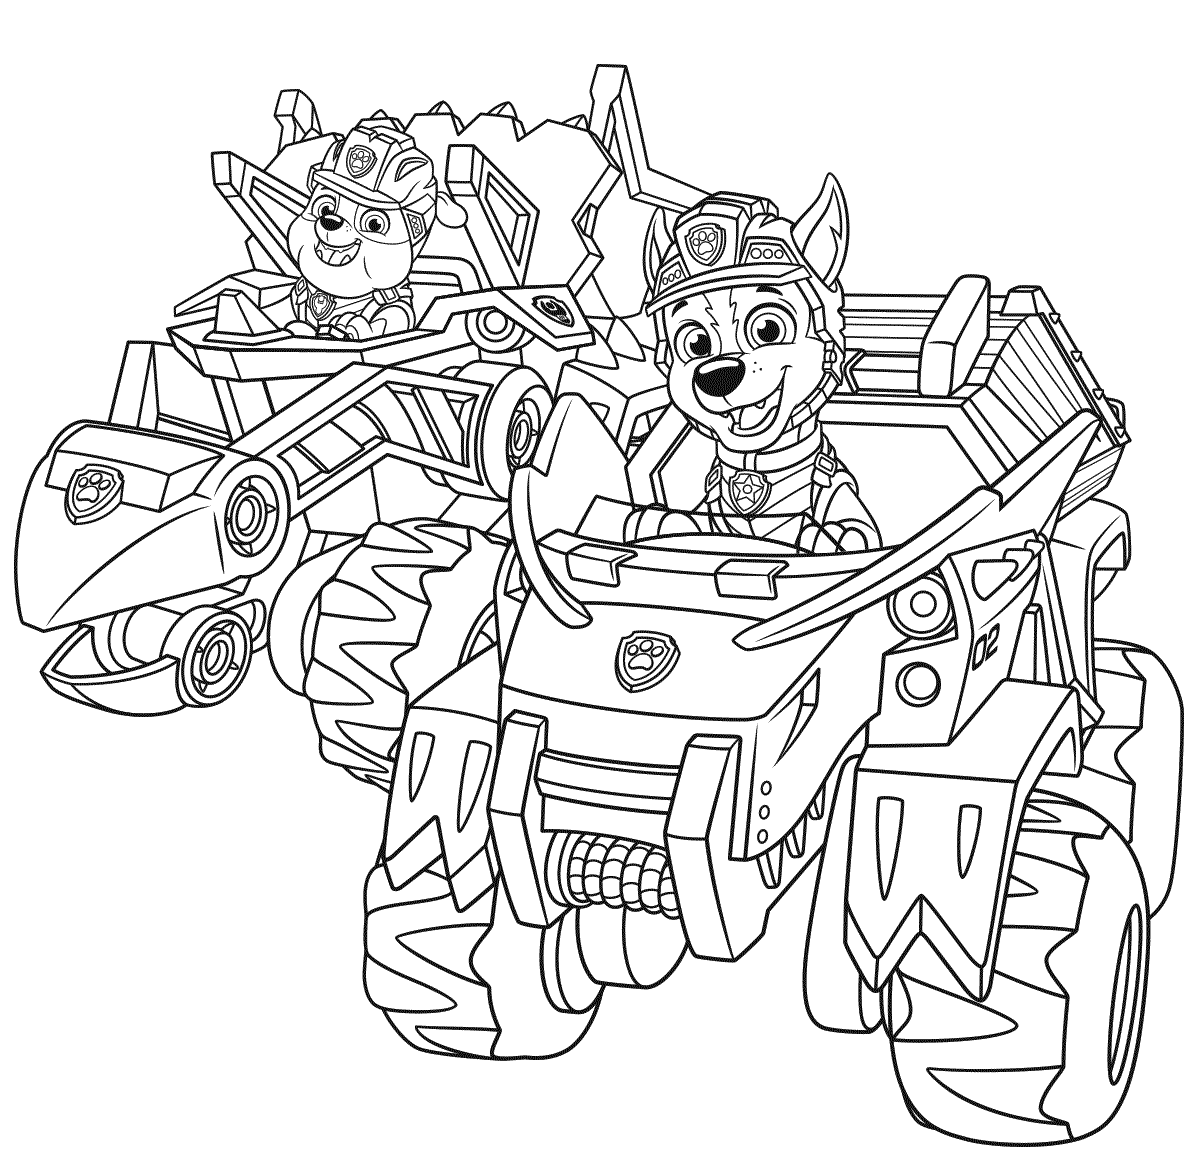 Paw Patrol Dino Rescue Cars Coloring Page